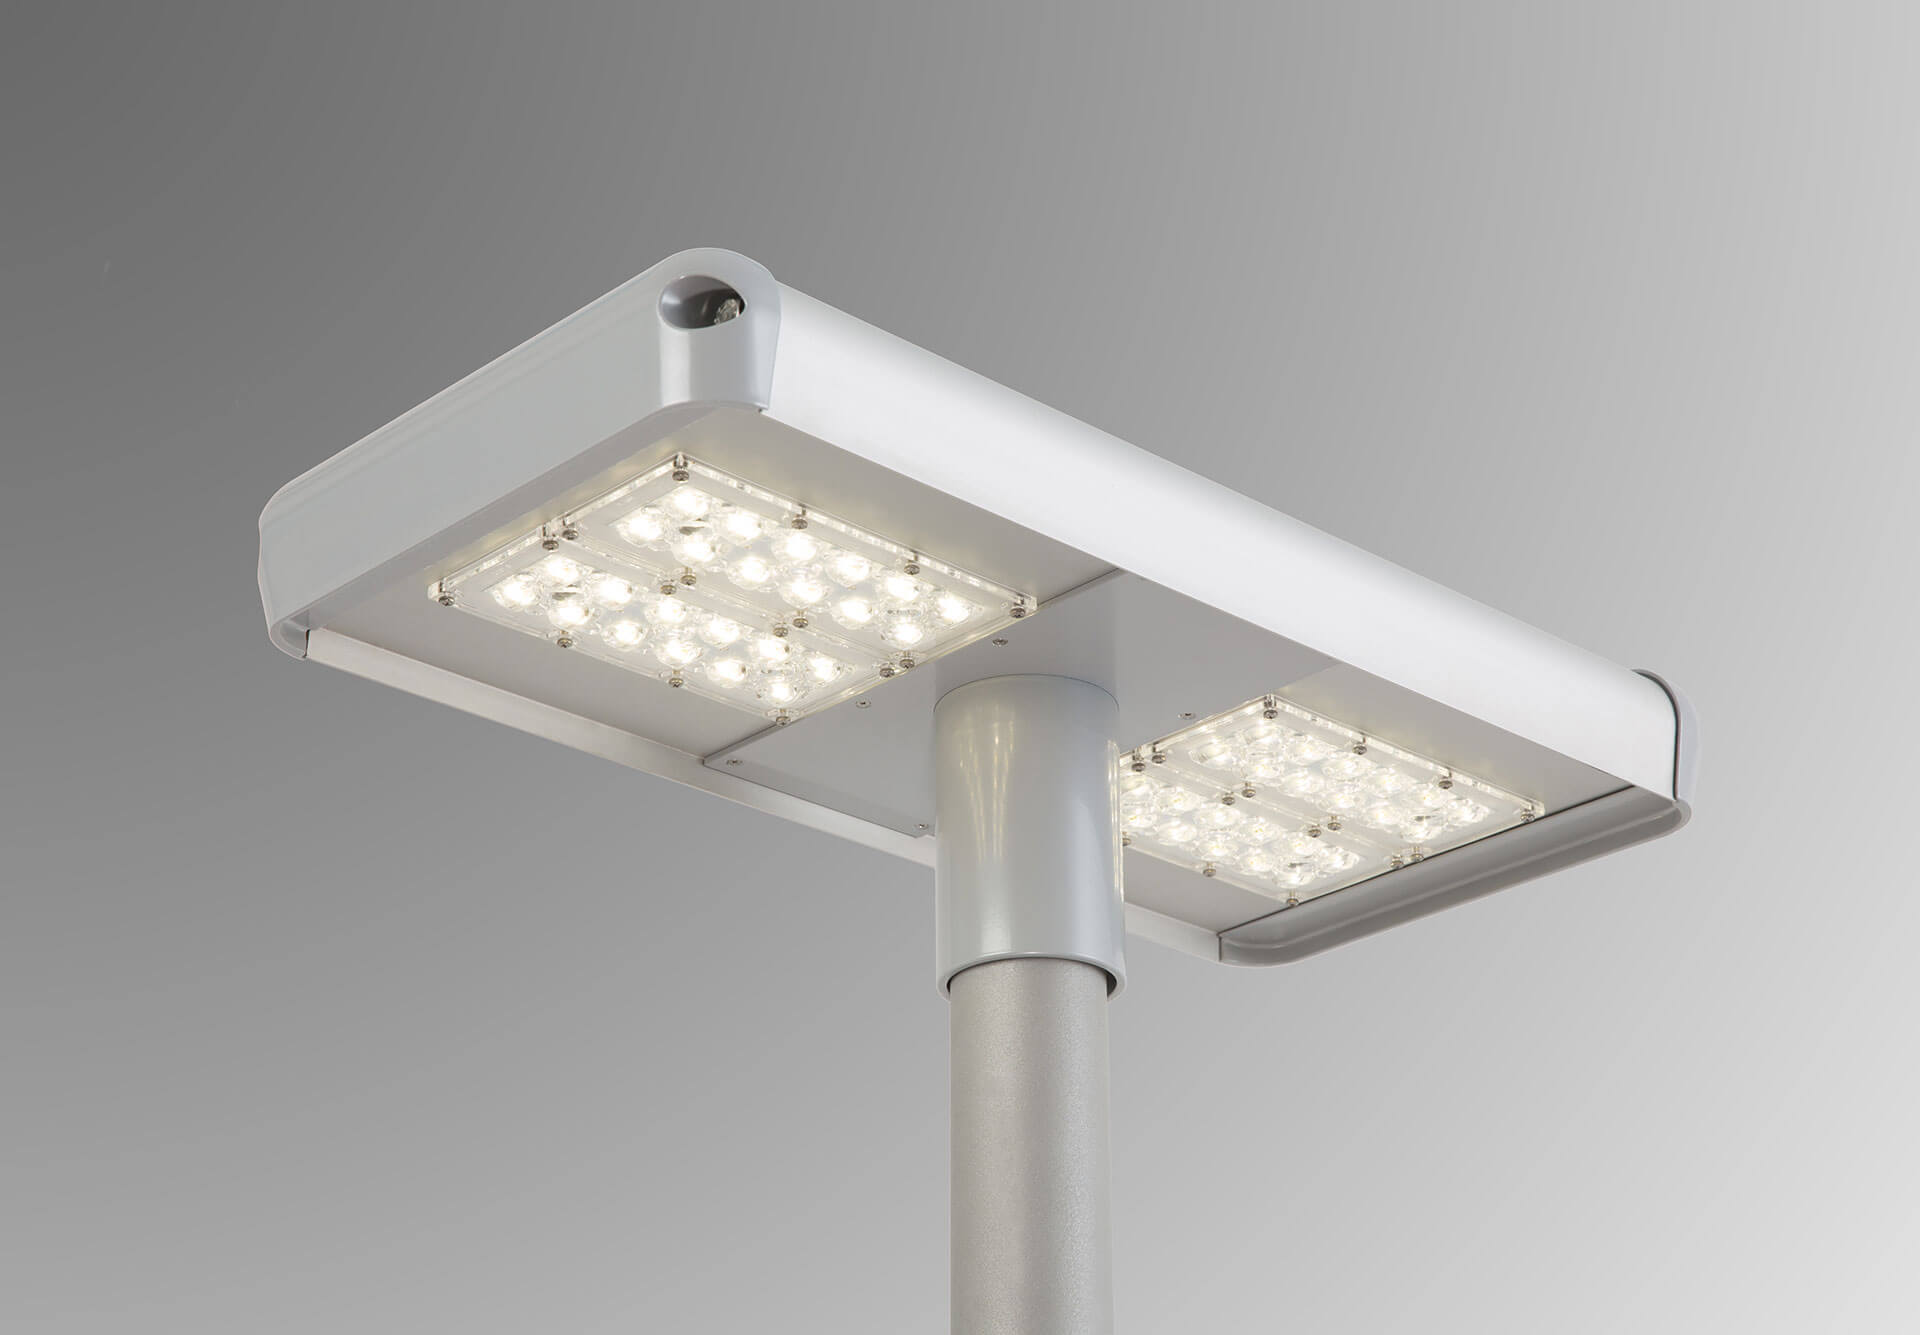 Home T Lamp – symmetrical light for parking lots and parks